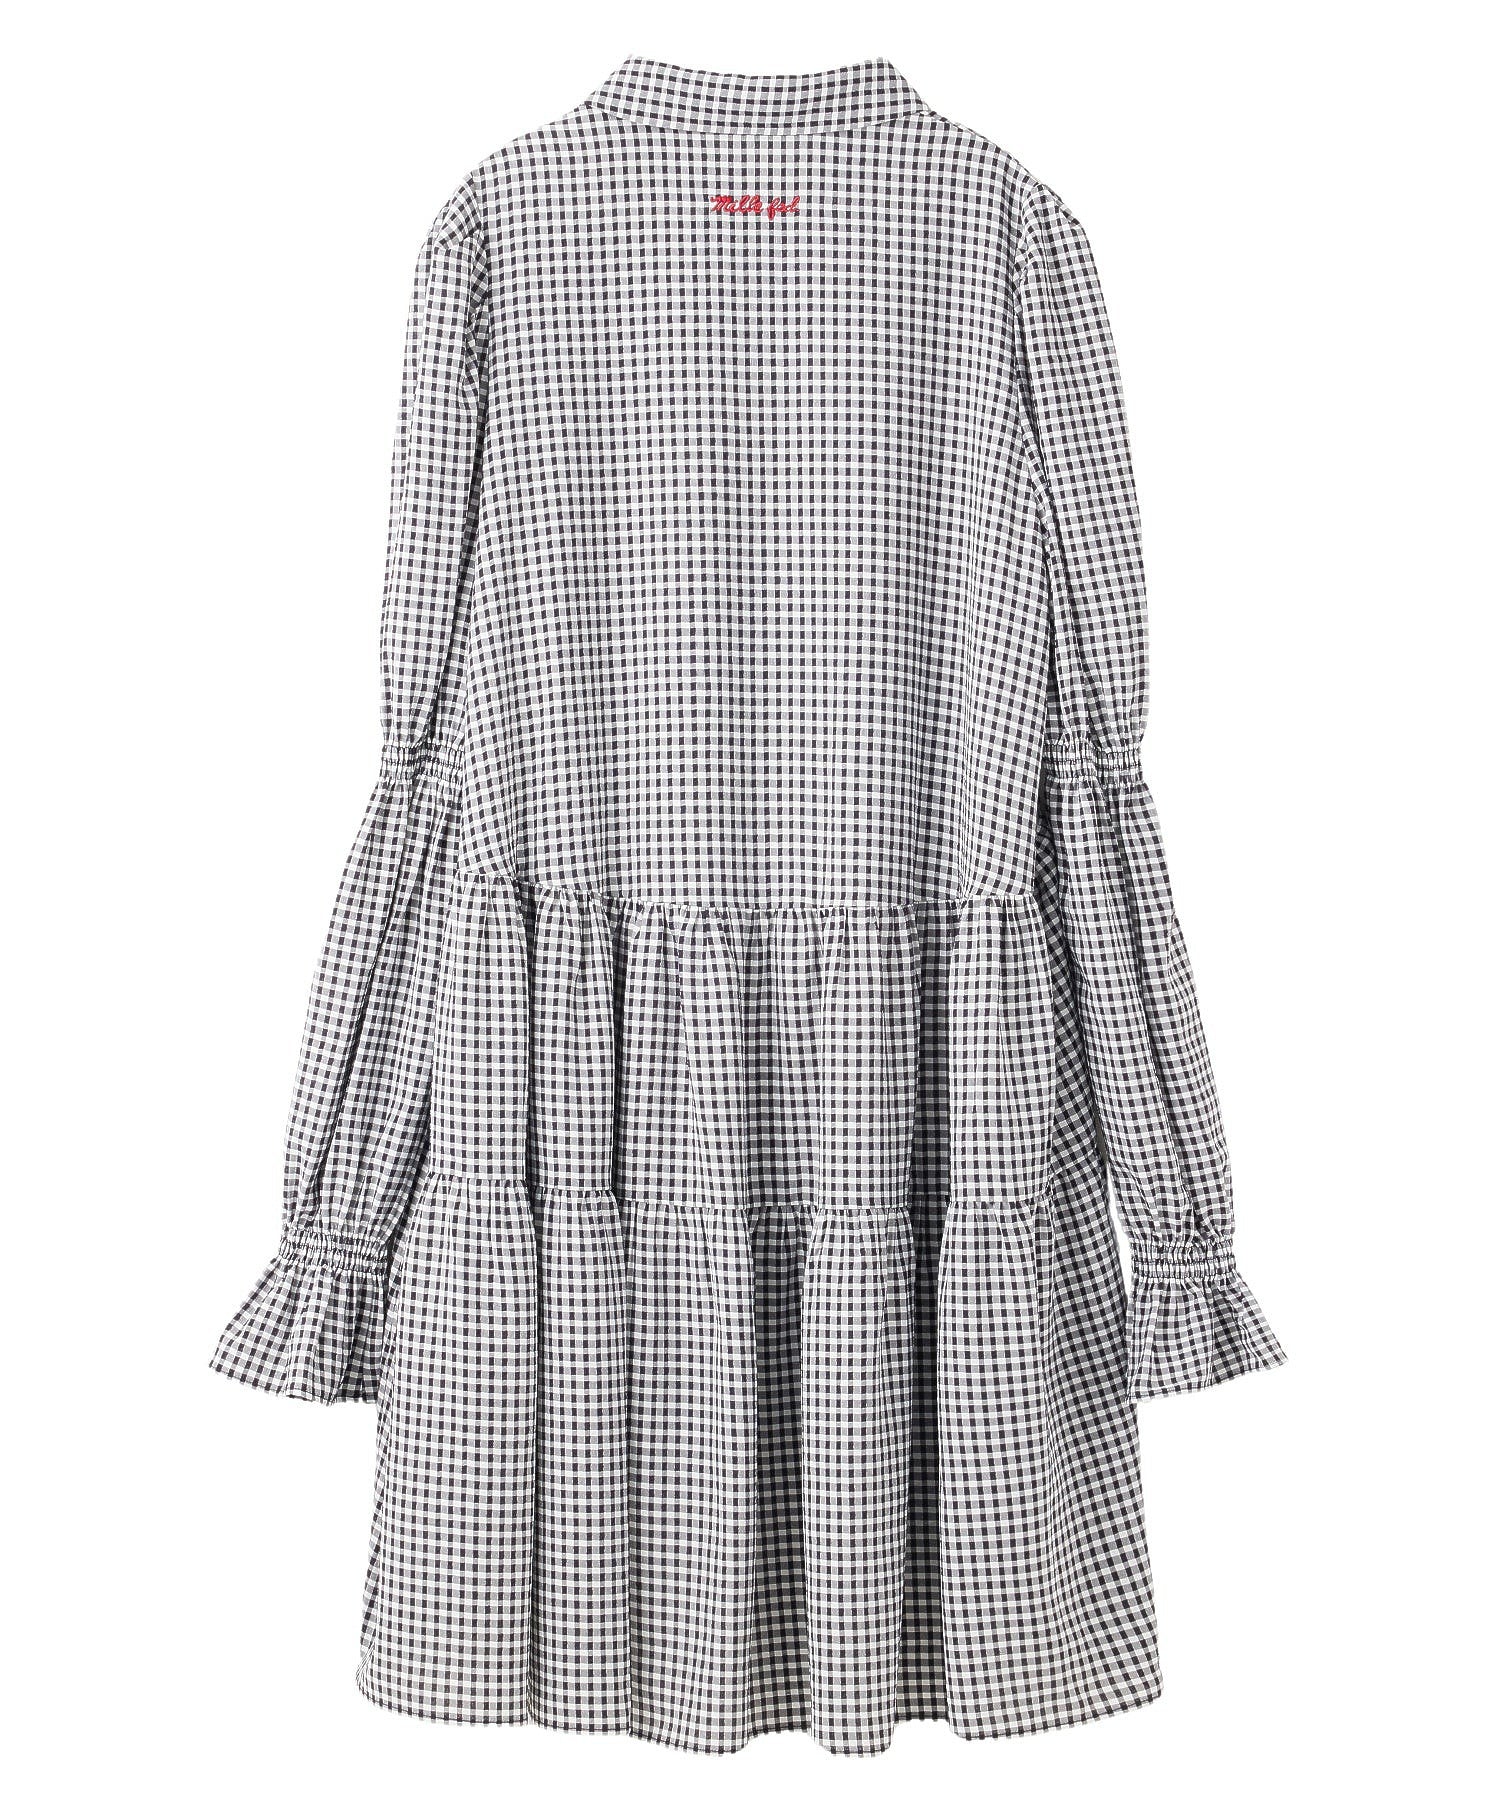 GINGHAM CHECK TIERED DRESS MILKFED.